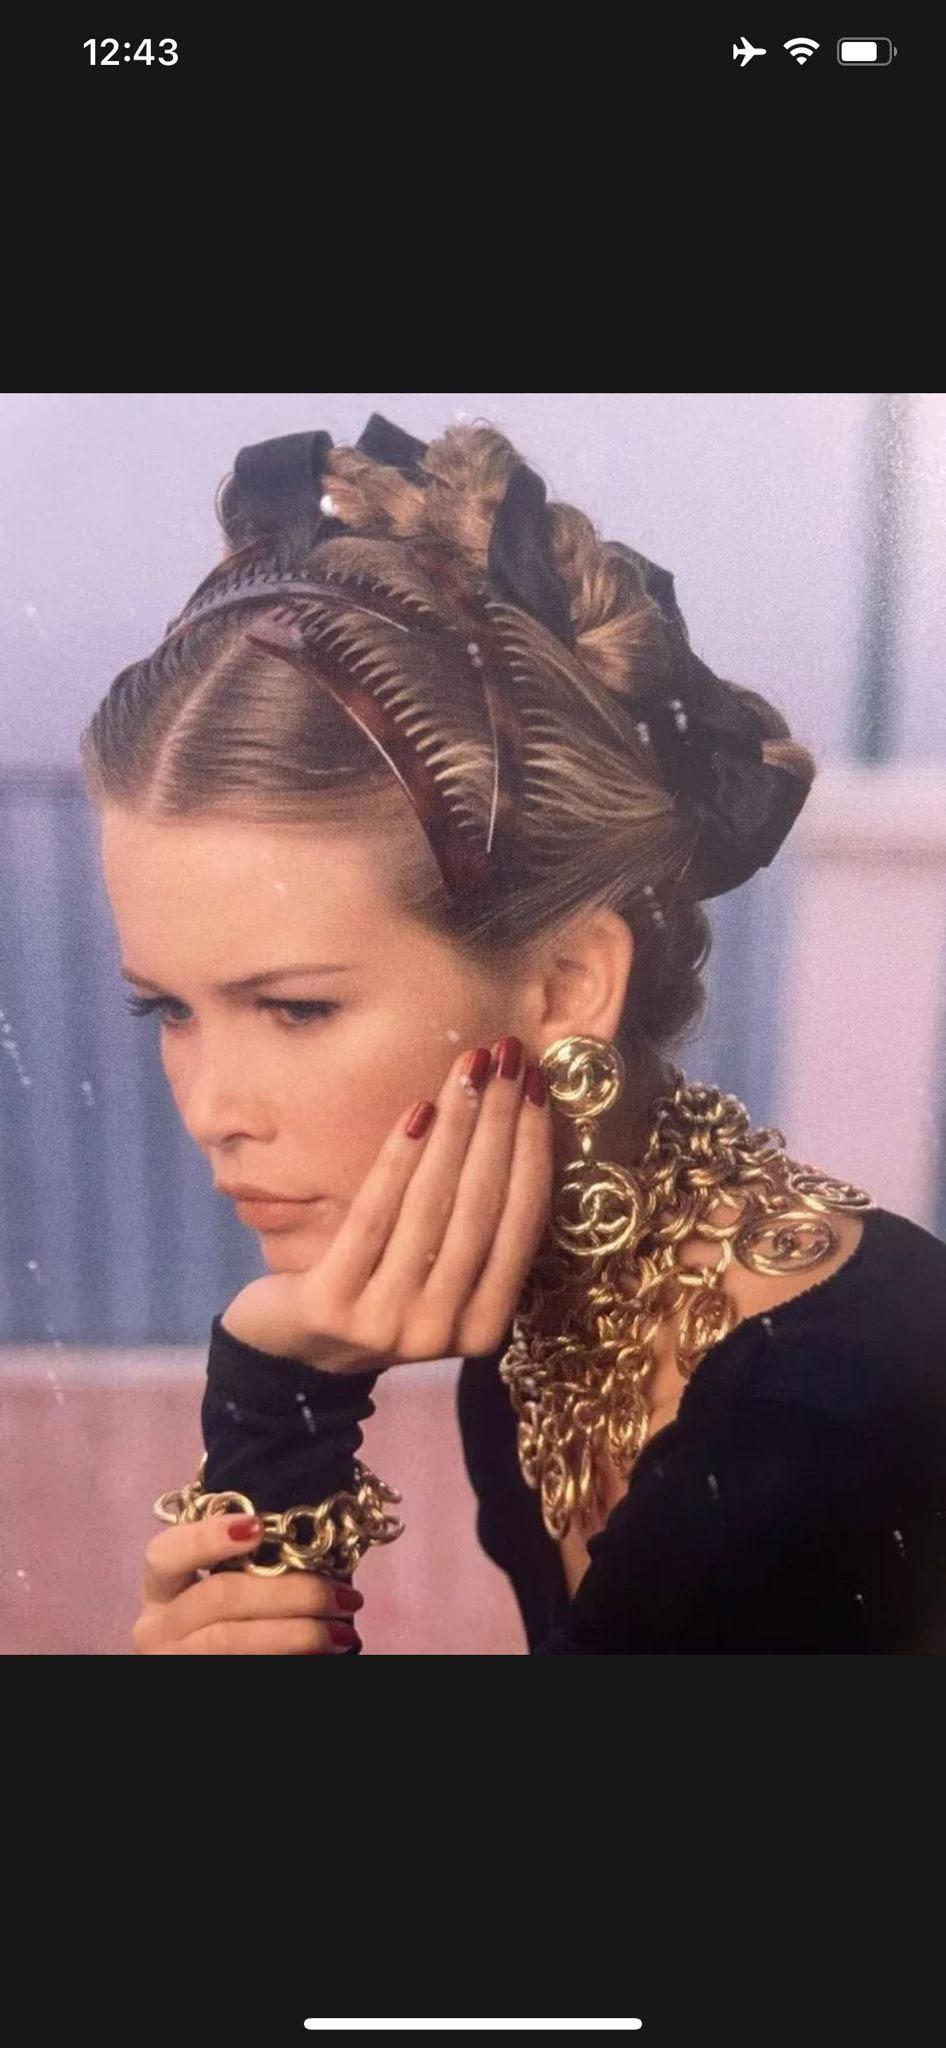 As seen on Claudia Shiffer in the original 90's ad campaign 
24k gold plated
Large dangle earrings the size of a quarter
Original Chanel box included

Listing price is for the pair



